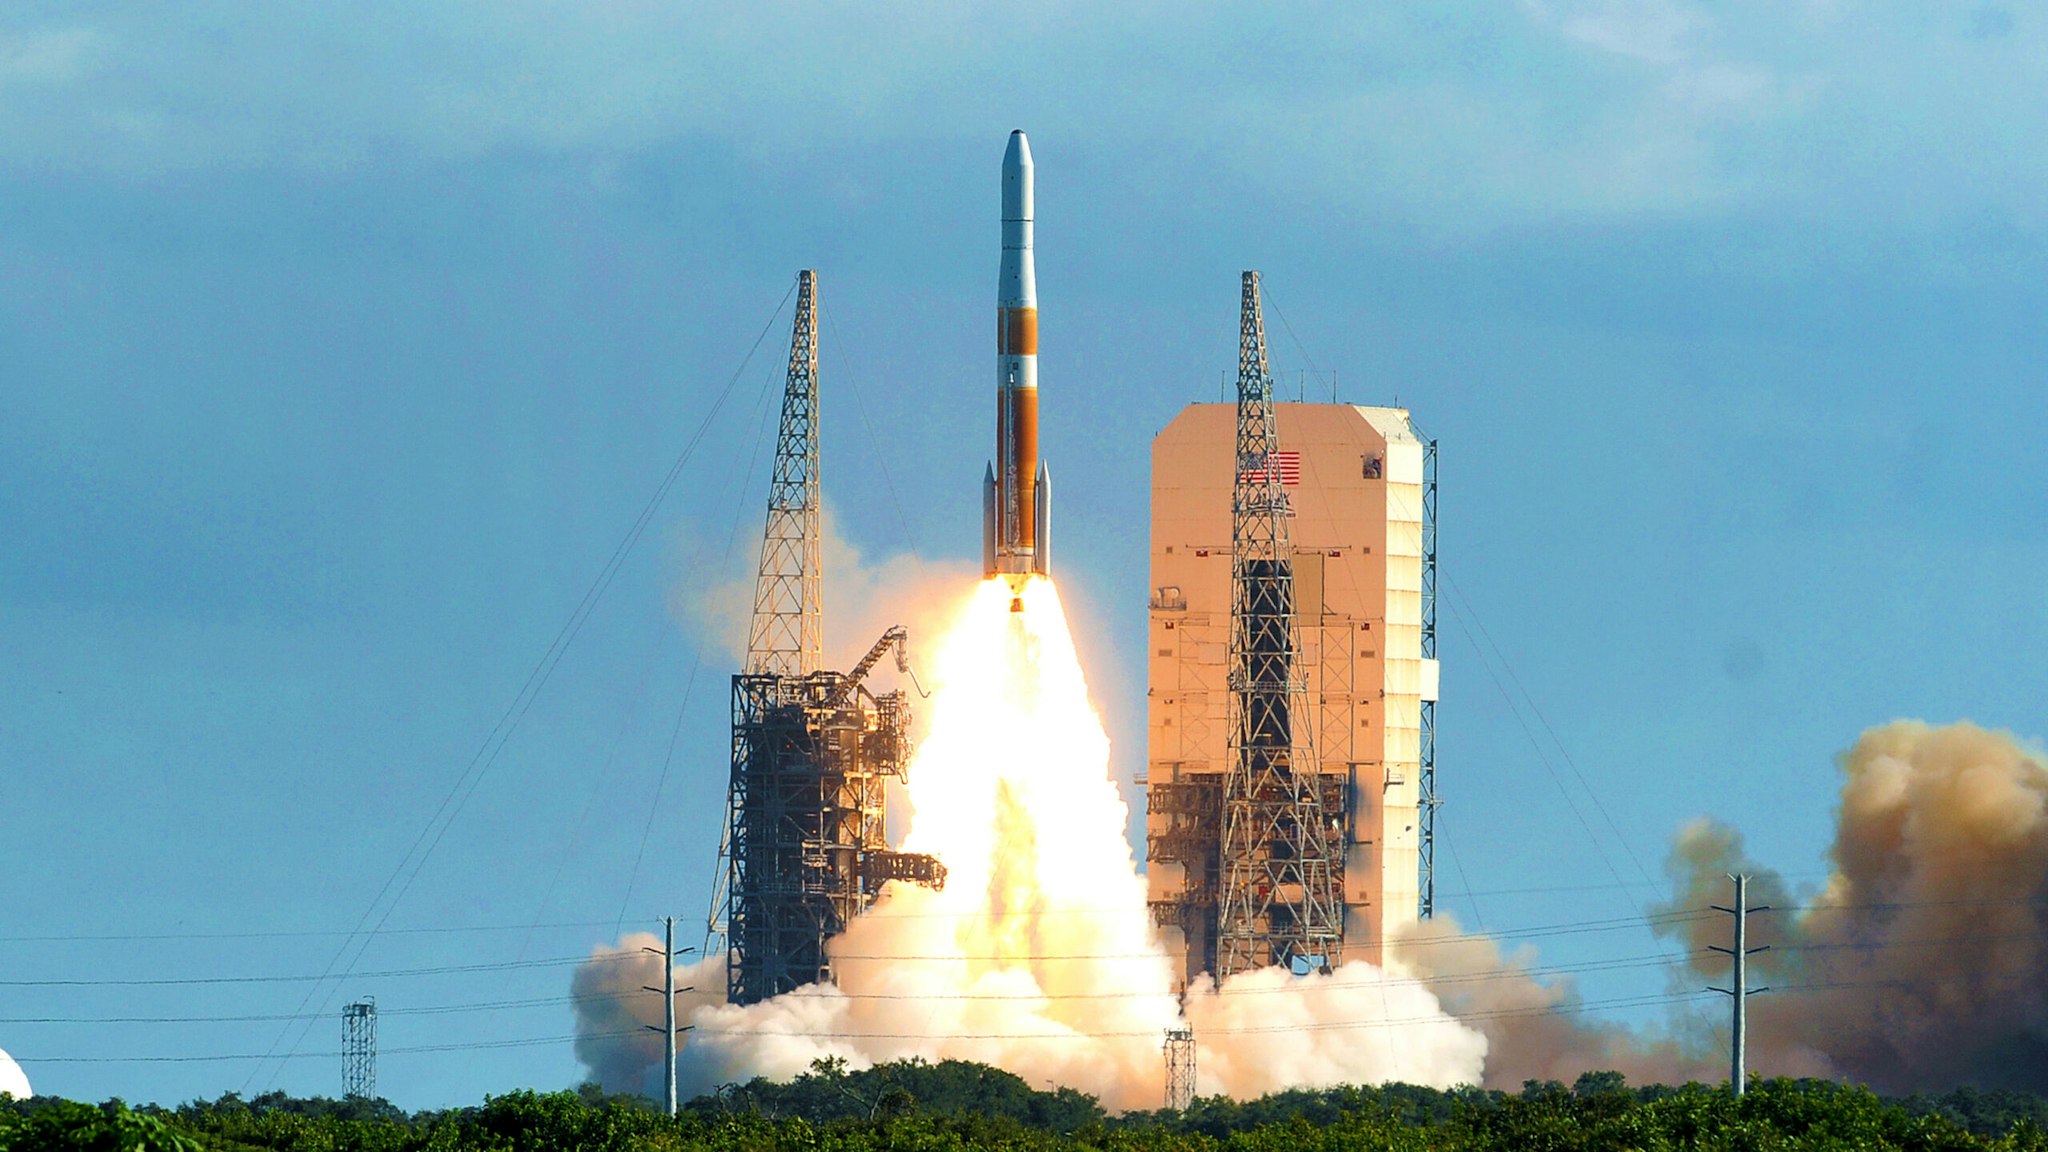 CAPE CANAVERAL, FL, UNITED STATES - 2019/08/22: A United Launch Alliance Delta IV rocket in space at complex 37 in Cape Canaveral Air Force Station carrying the second GPS III Magellan spacecraft to a medium earth orbit for the U.S. Air Force.